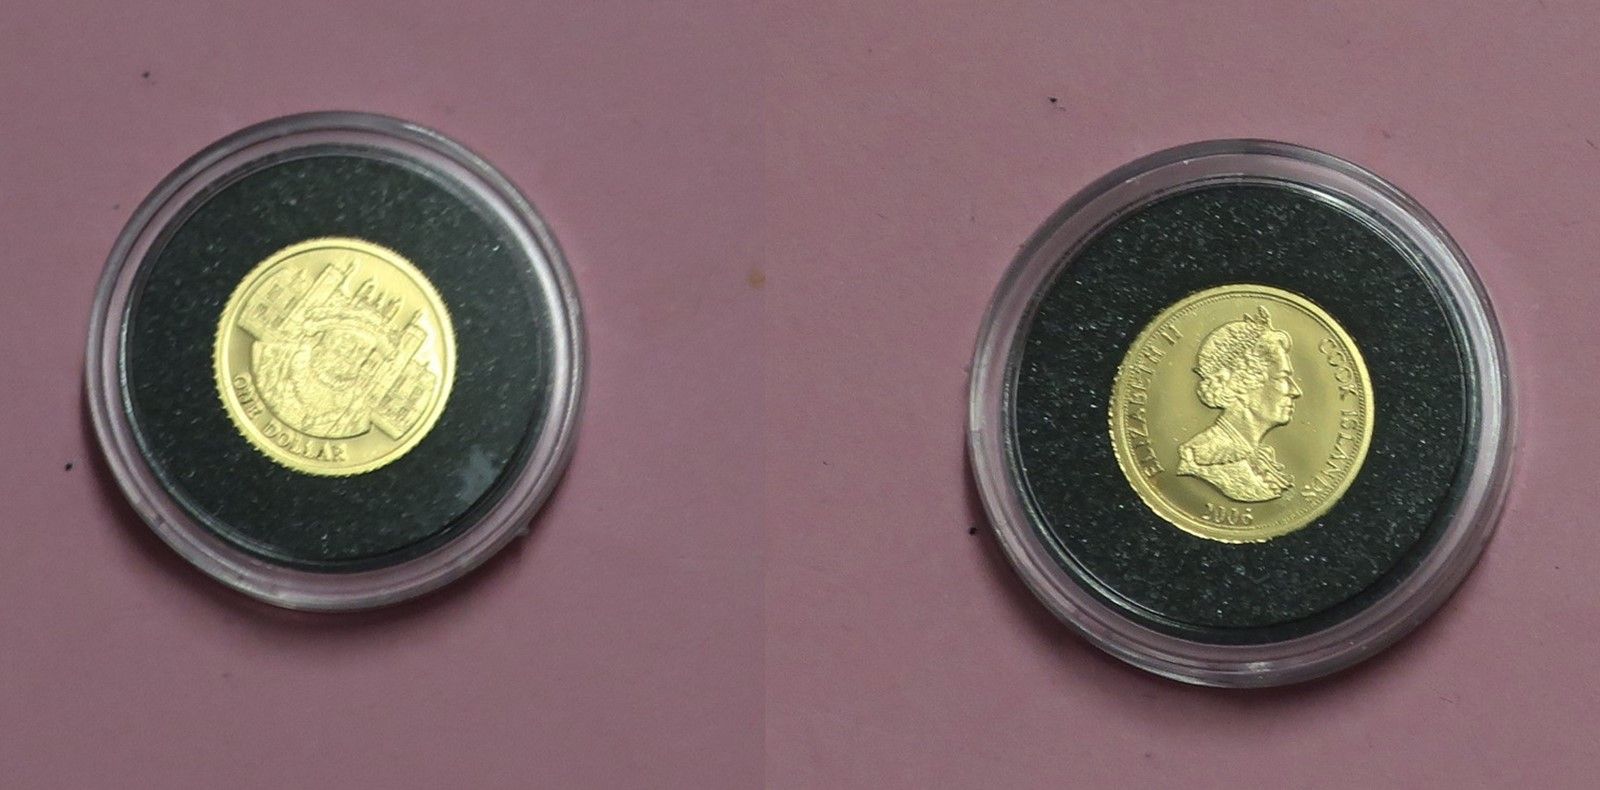 Null Gold coin 1 $, Cook Islands-Commonwealth 2006, approx. 0.5 gram, 999 gold